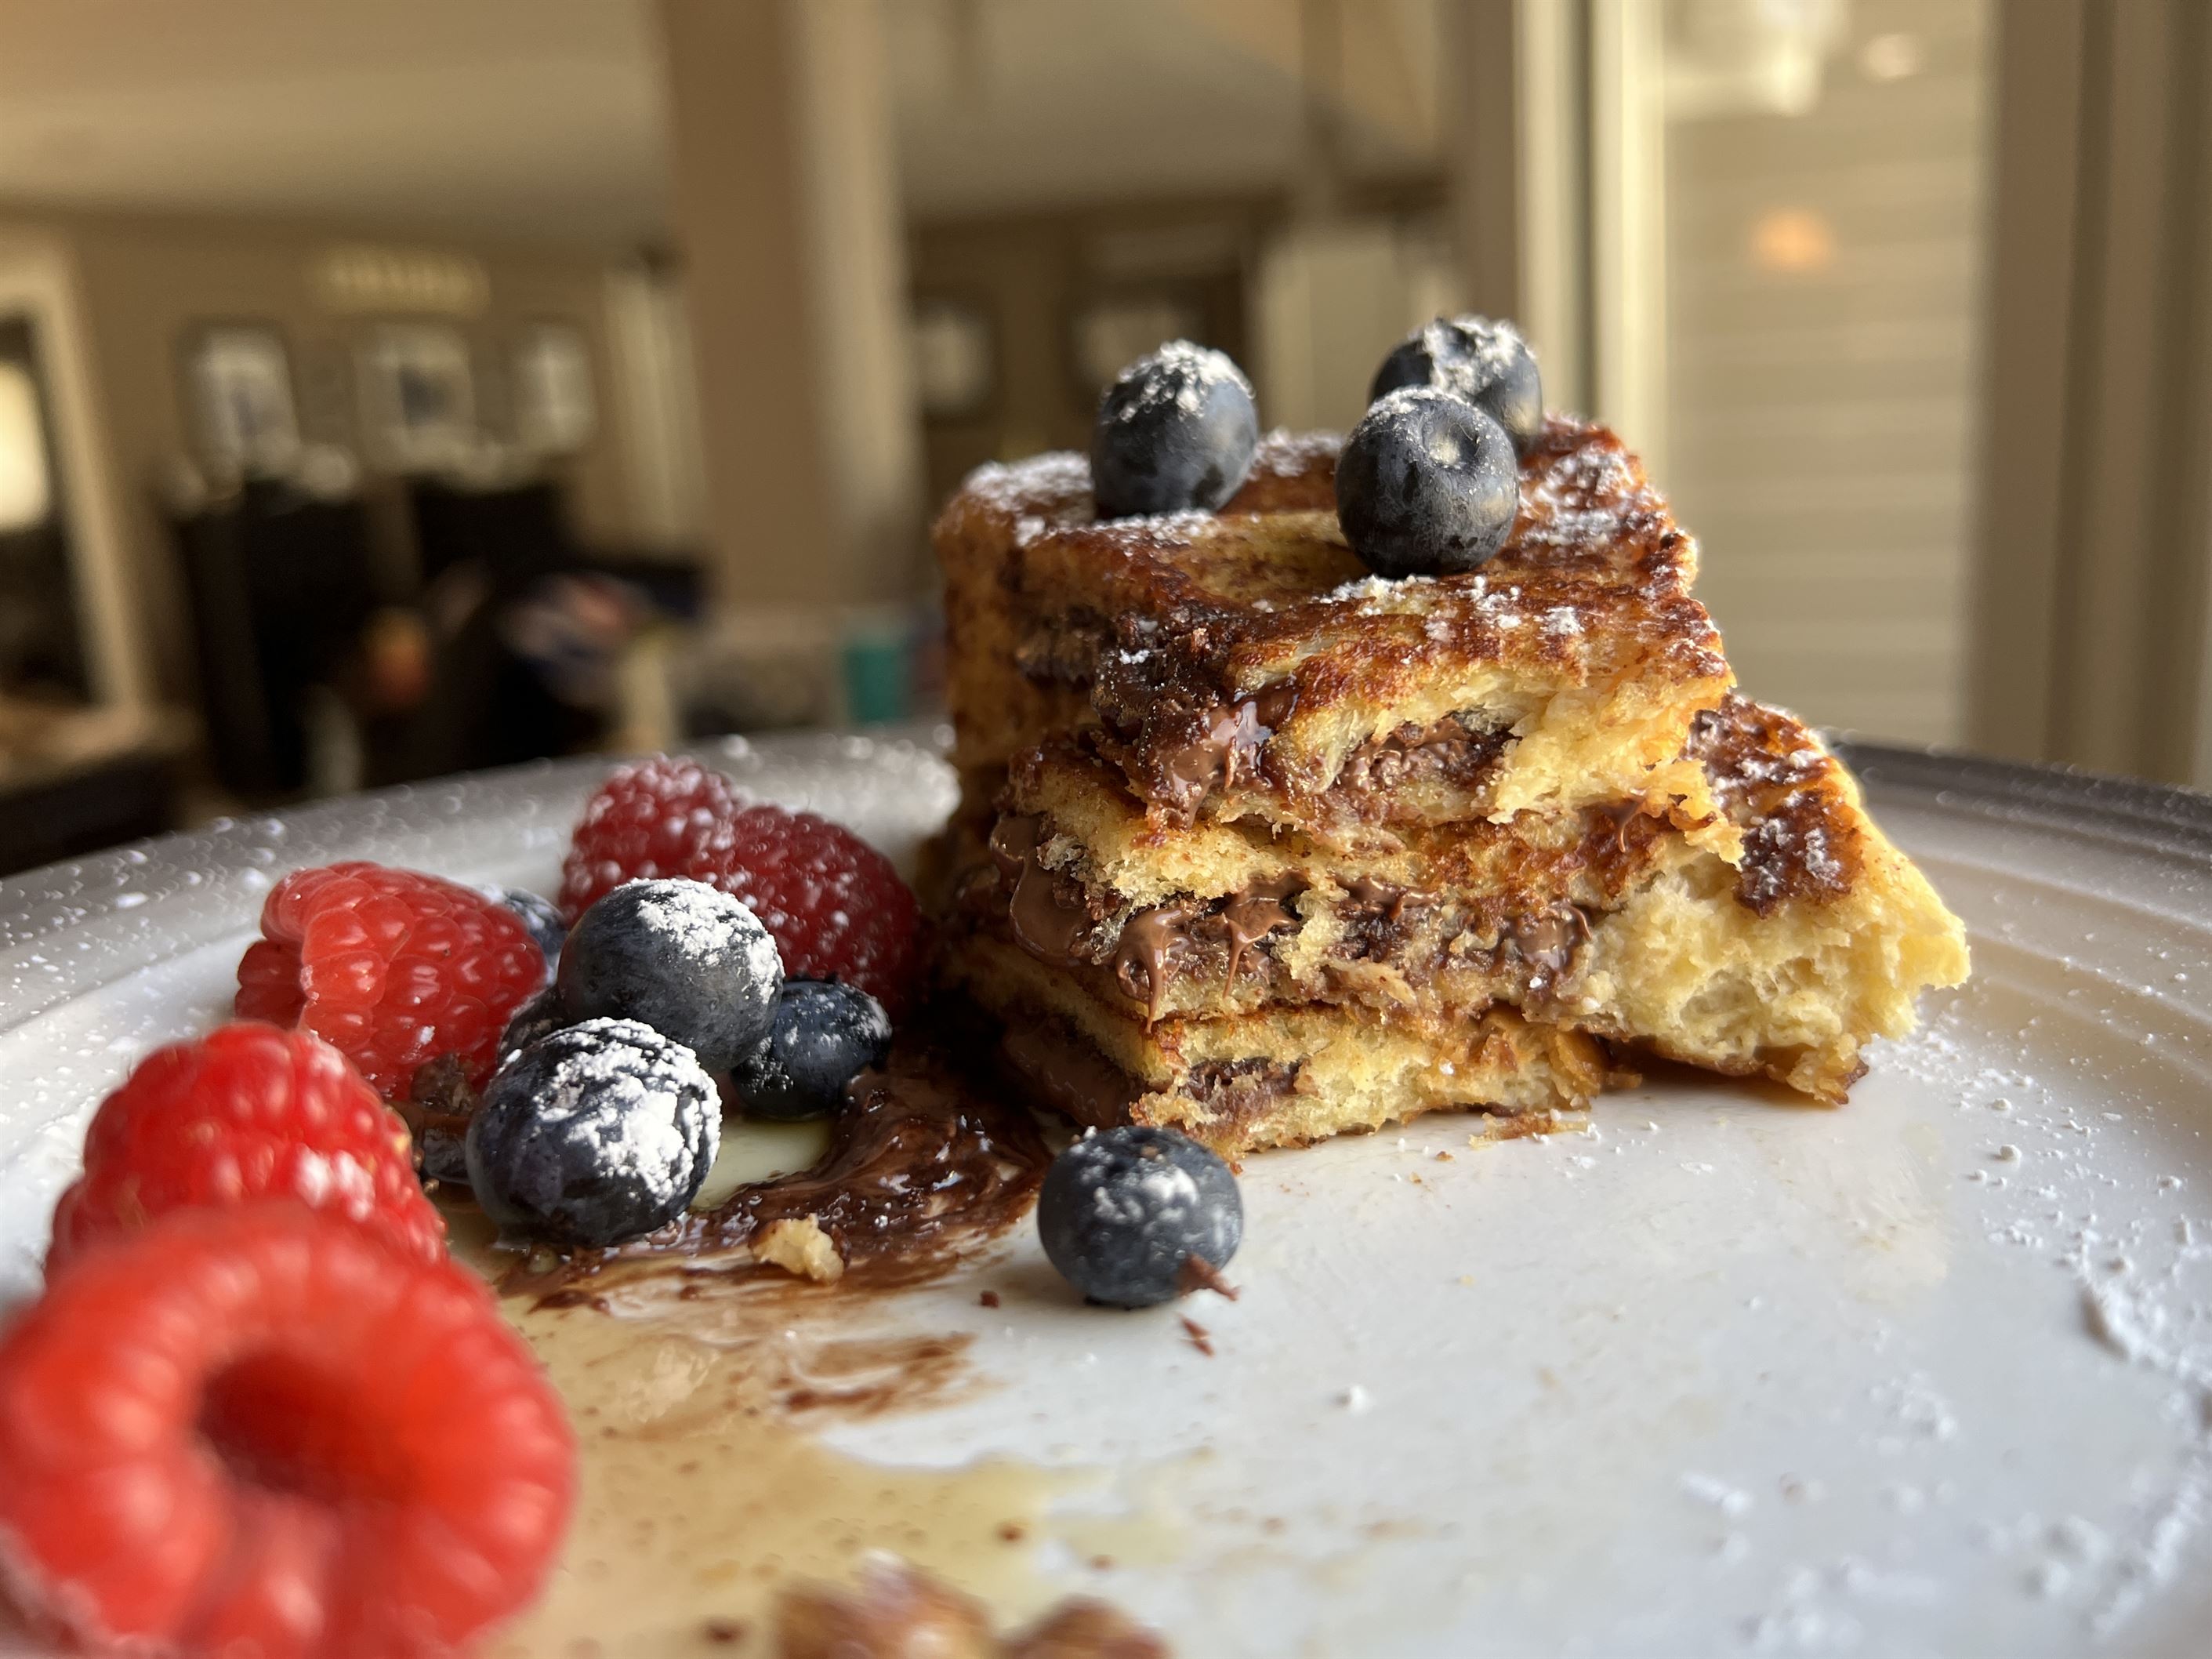 Your date will not be able to stop eating this sweet and light french toast. Samantha Bailey | The Montclarion